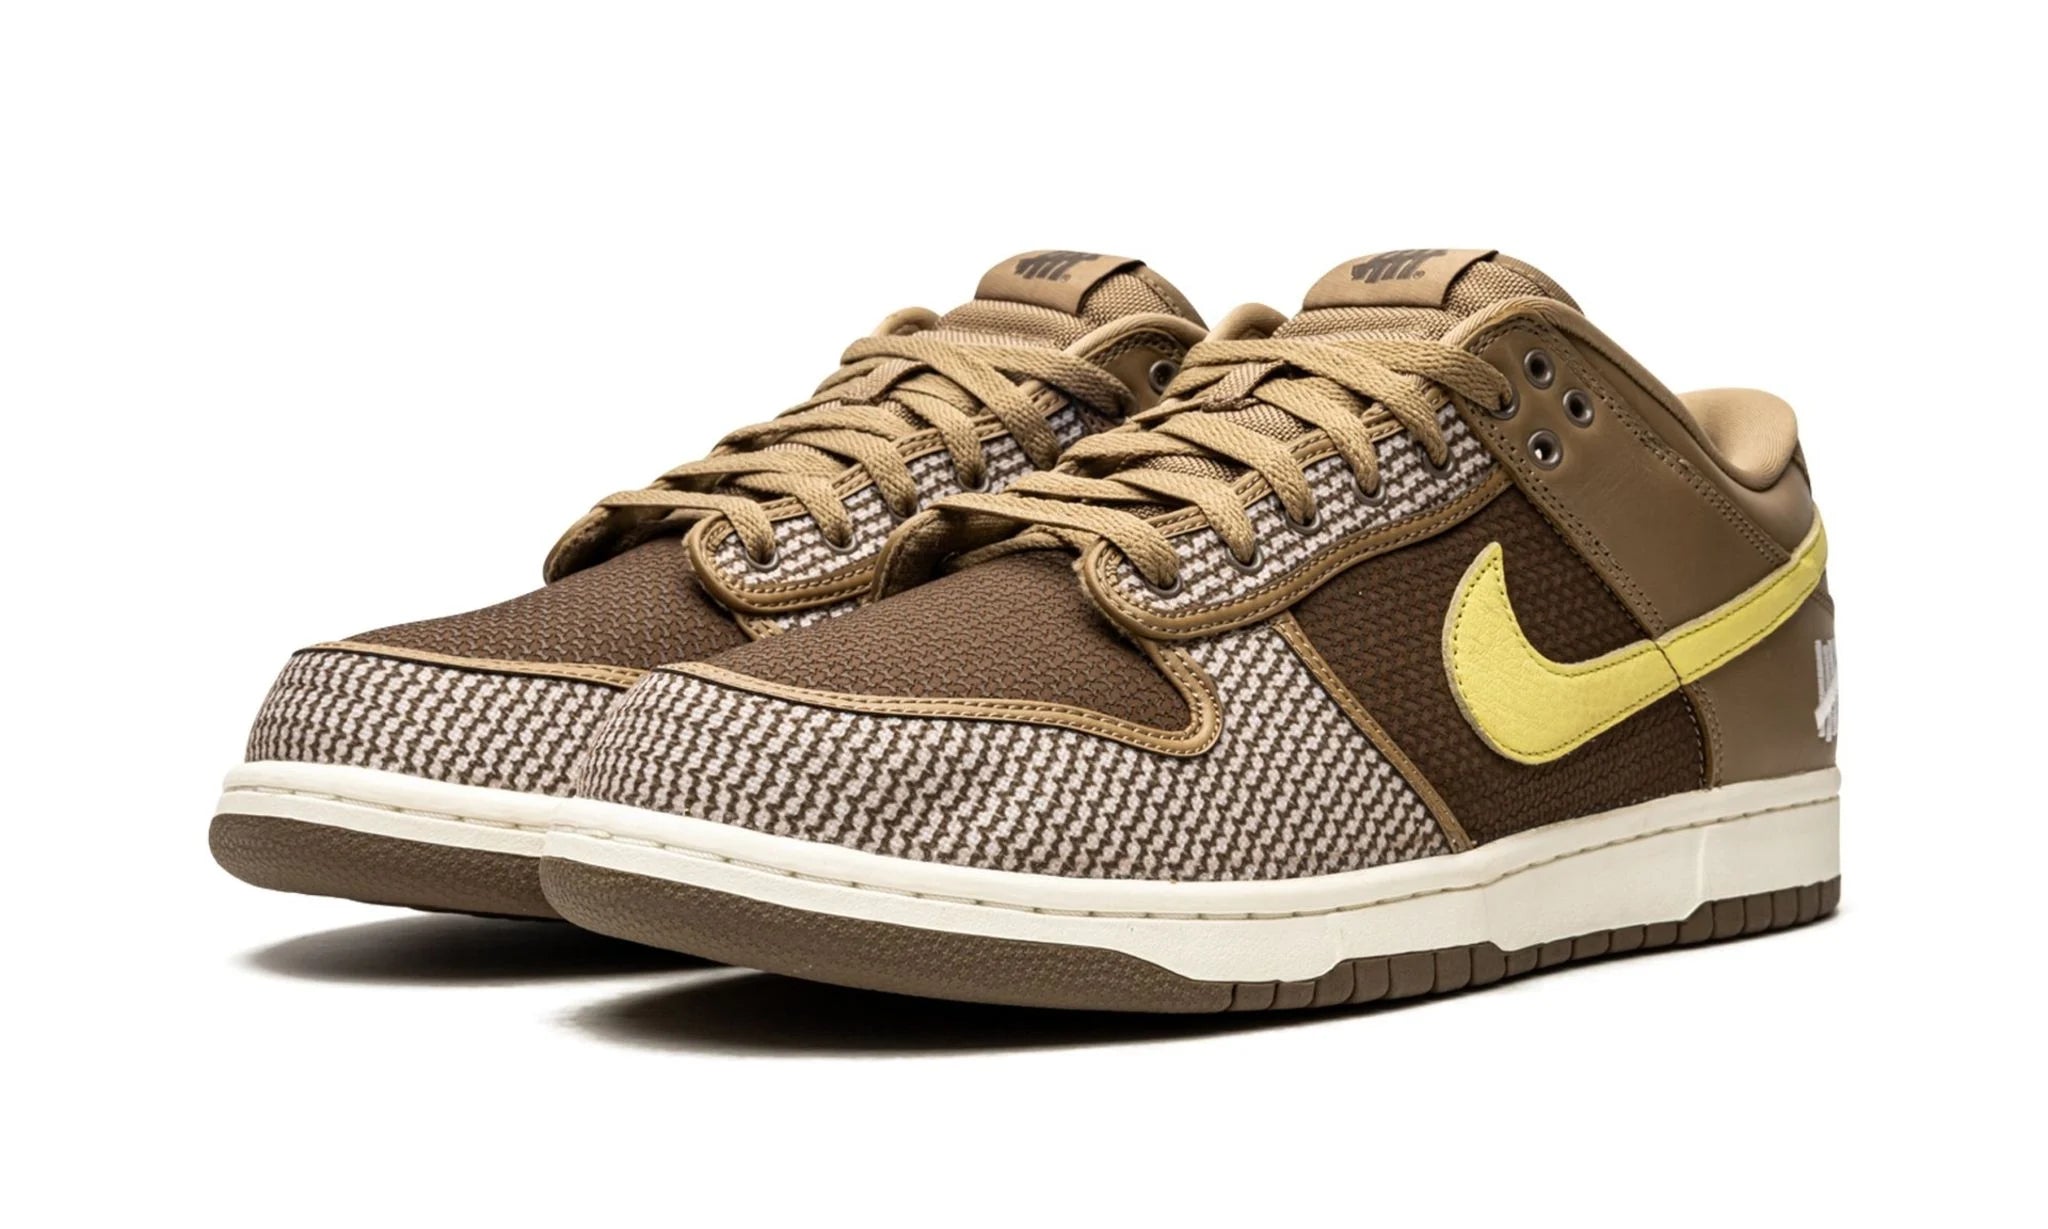 Nike Dunk Low SP Undefeated Canteen Dunk vs. AF1 Pack - Dunk Low - Pirri